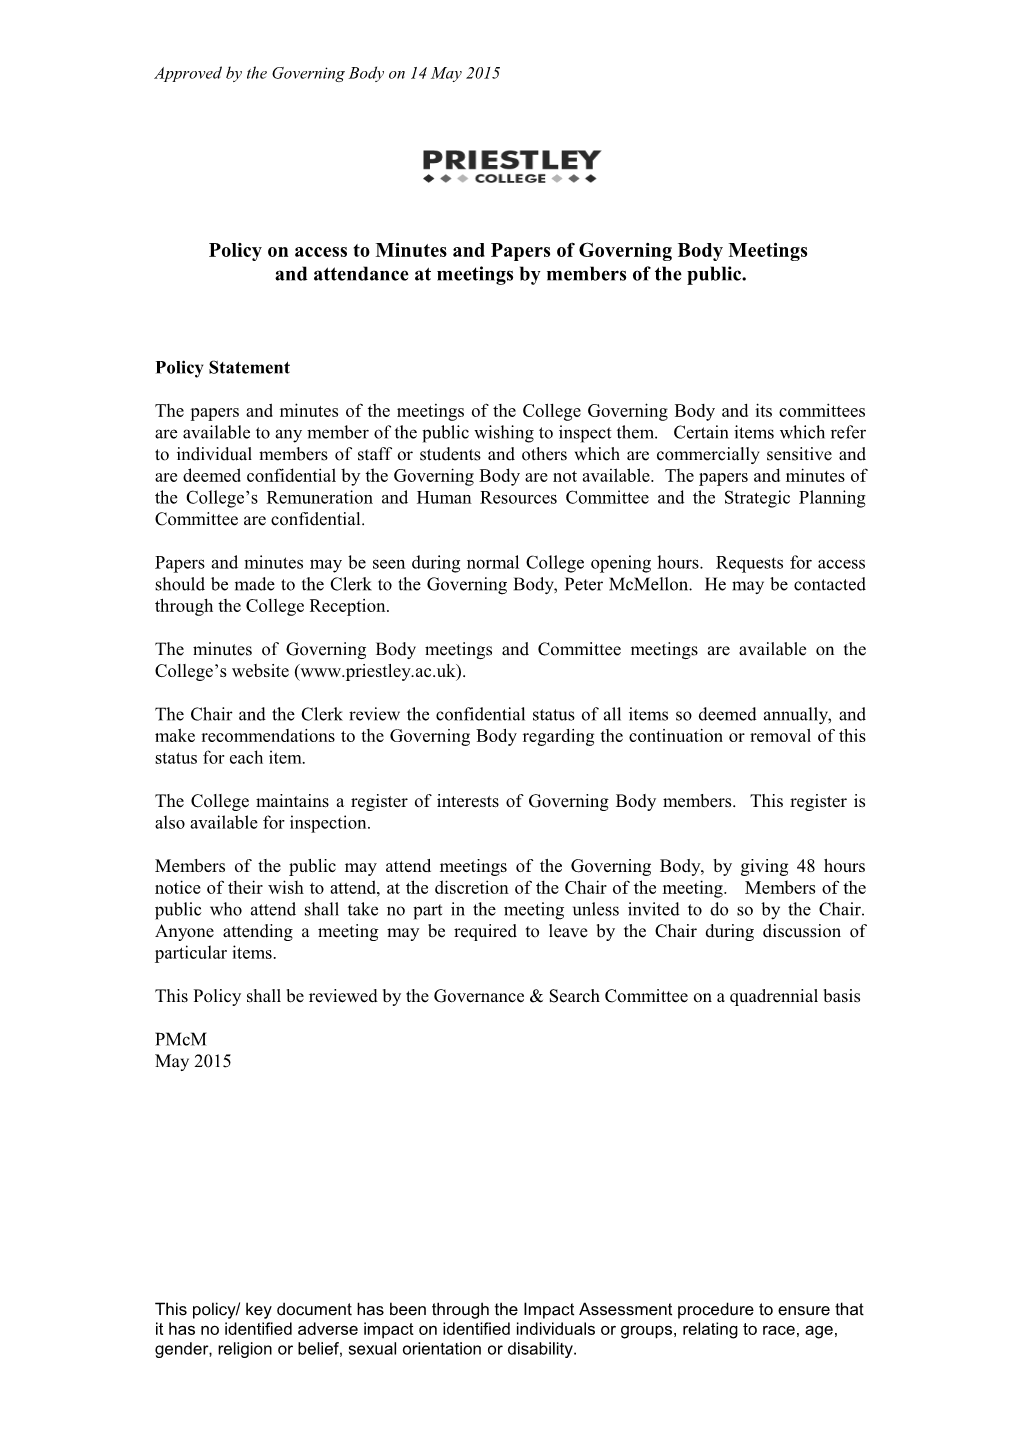 Policy on Access to Minutes and Papers of Governing Body Meetings